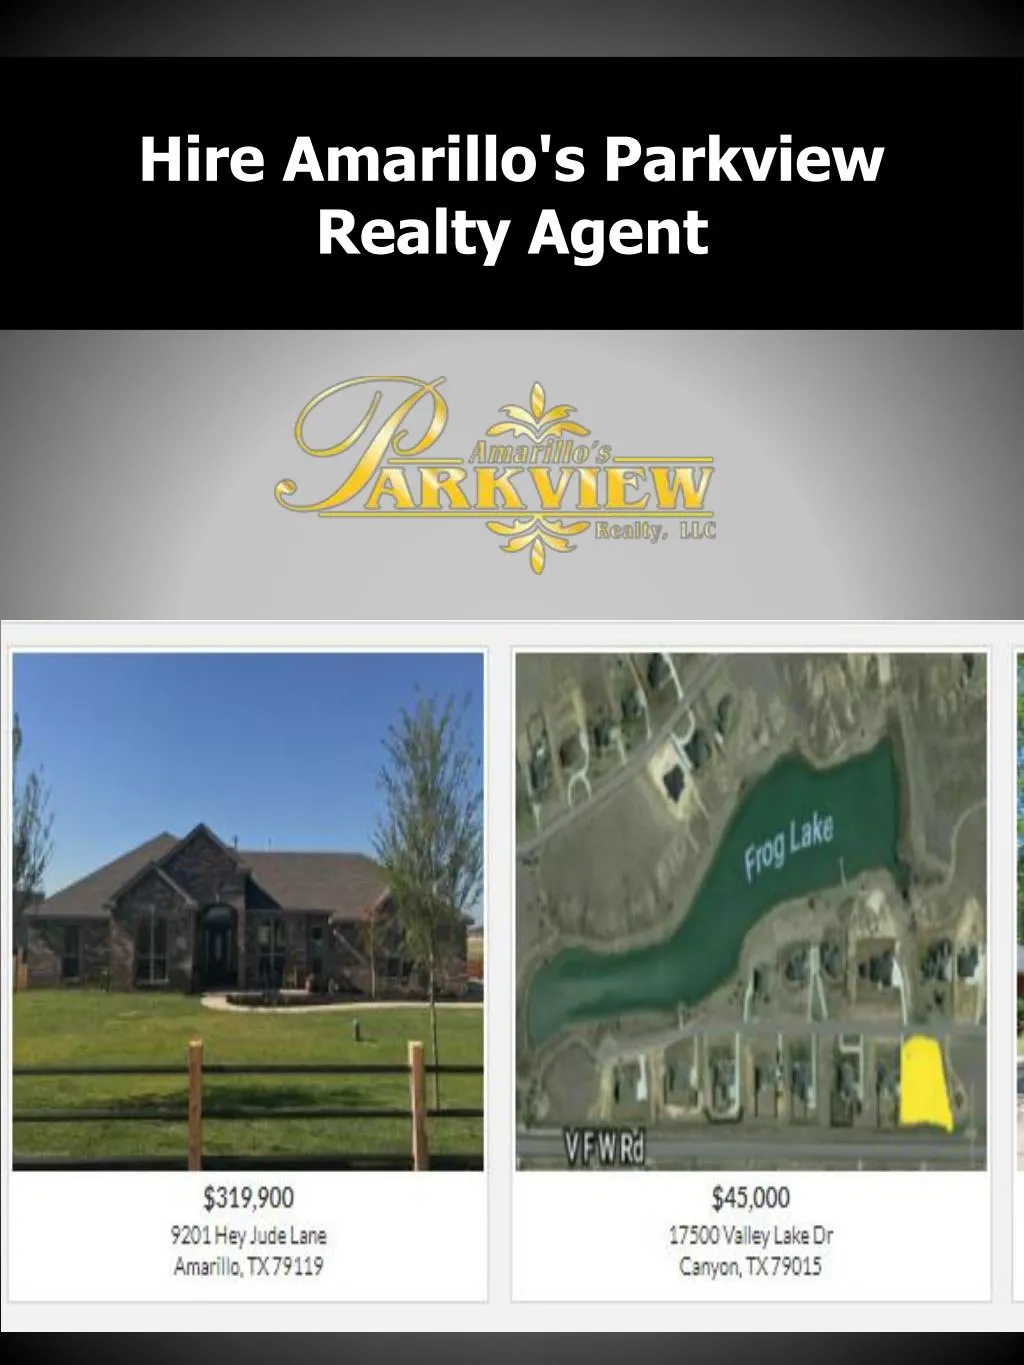 hire amarillo s parkview realty agent